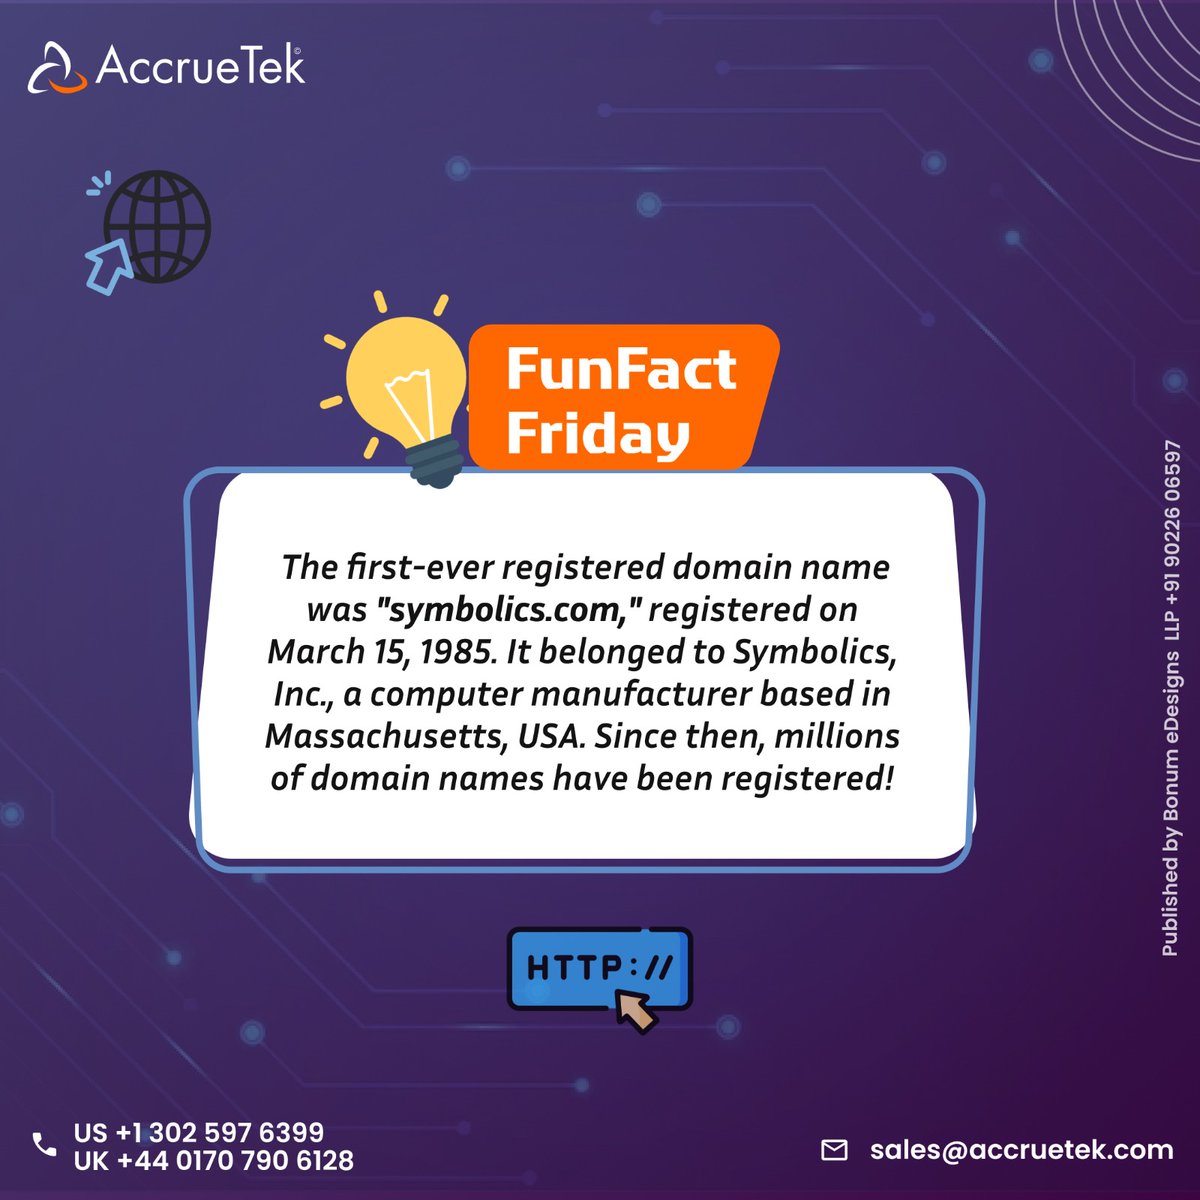 Here's a Friday Fun Fact for you!😉
#explorepage #viralpost #FridayFun #FridayFact #ITsupport #itservices #ITproducts #itinfrastructure #businessgrowth #accruetek #UK #USA